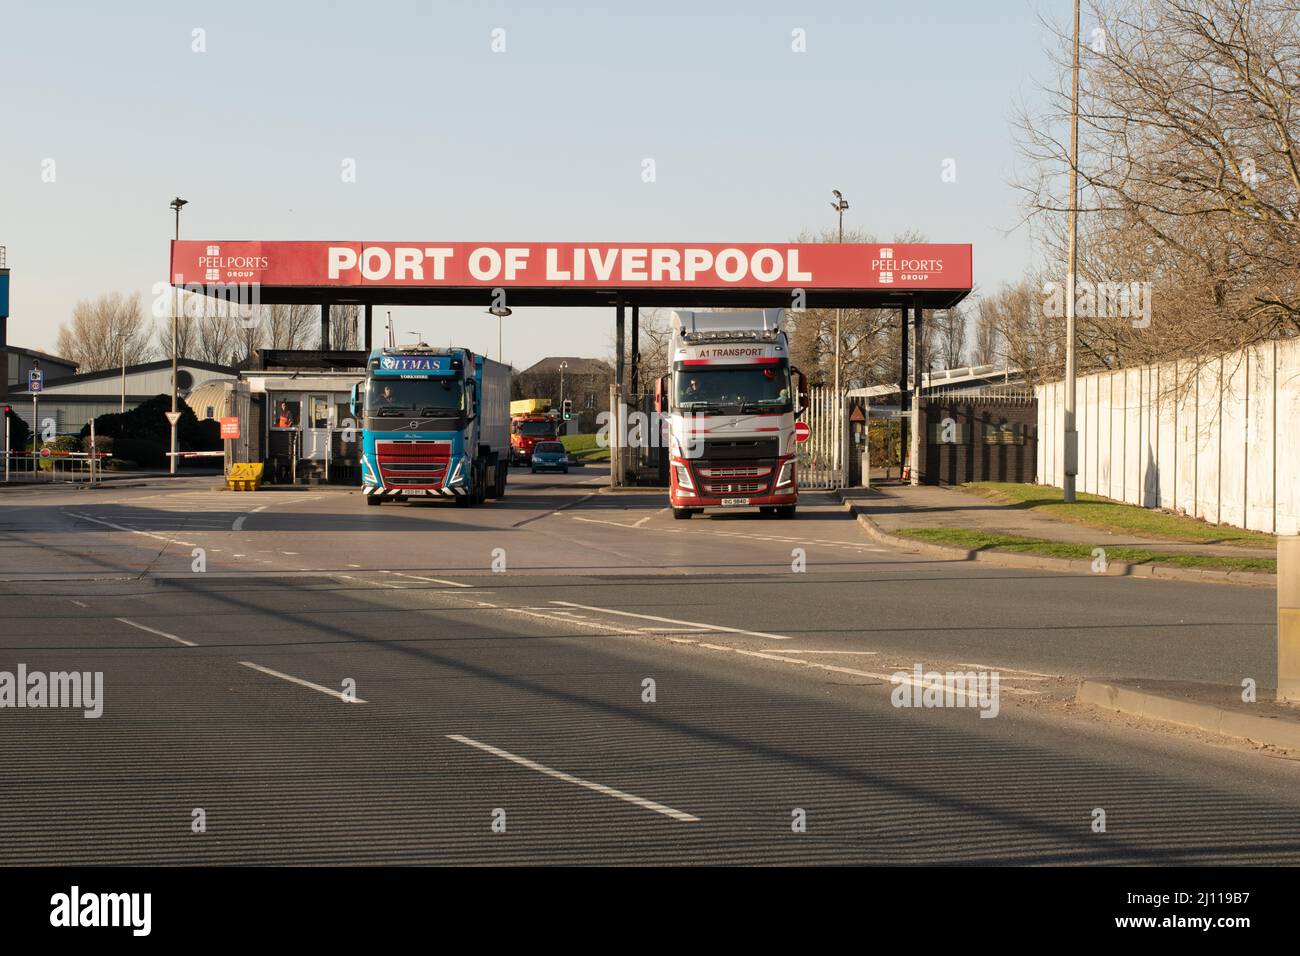 Port of Liverpool sign. Entrance to docks with sign and Peel Ports Group logo. Lorries leaving port. Stock Photo